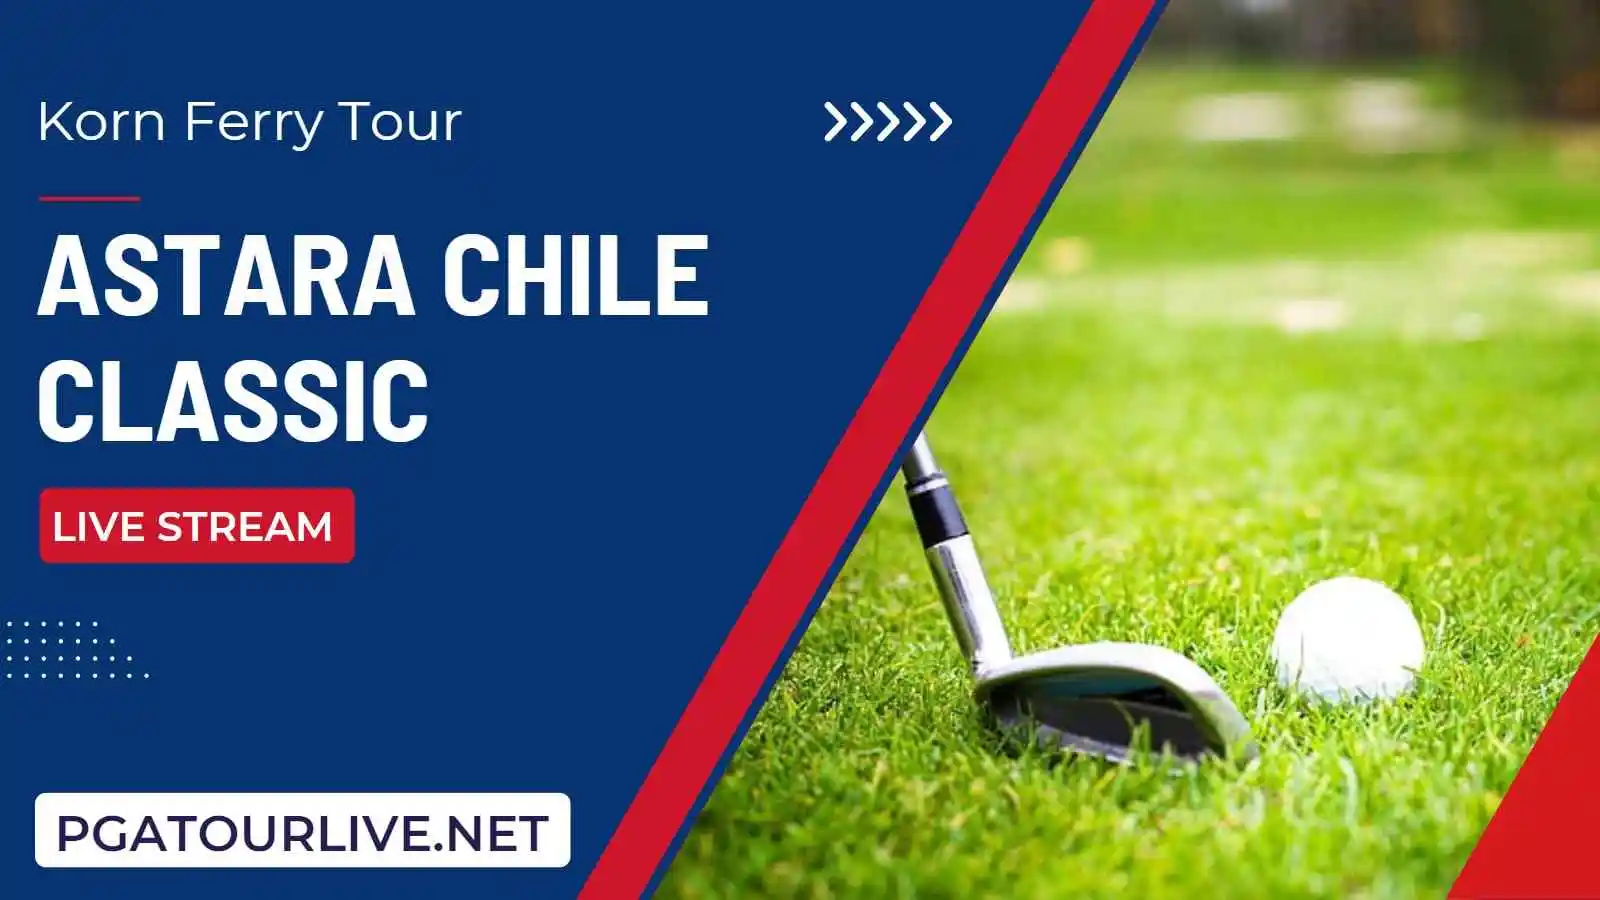 How to Watch Astara Chile Classic Live